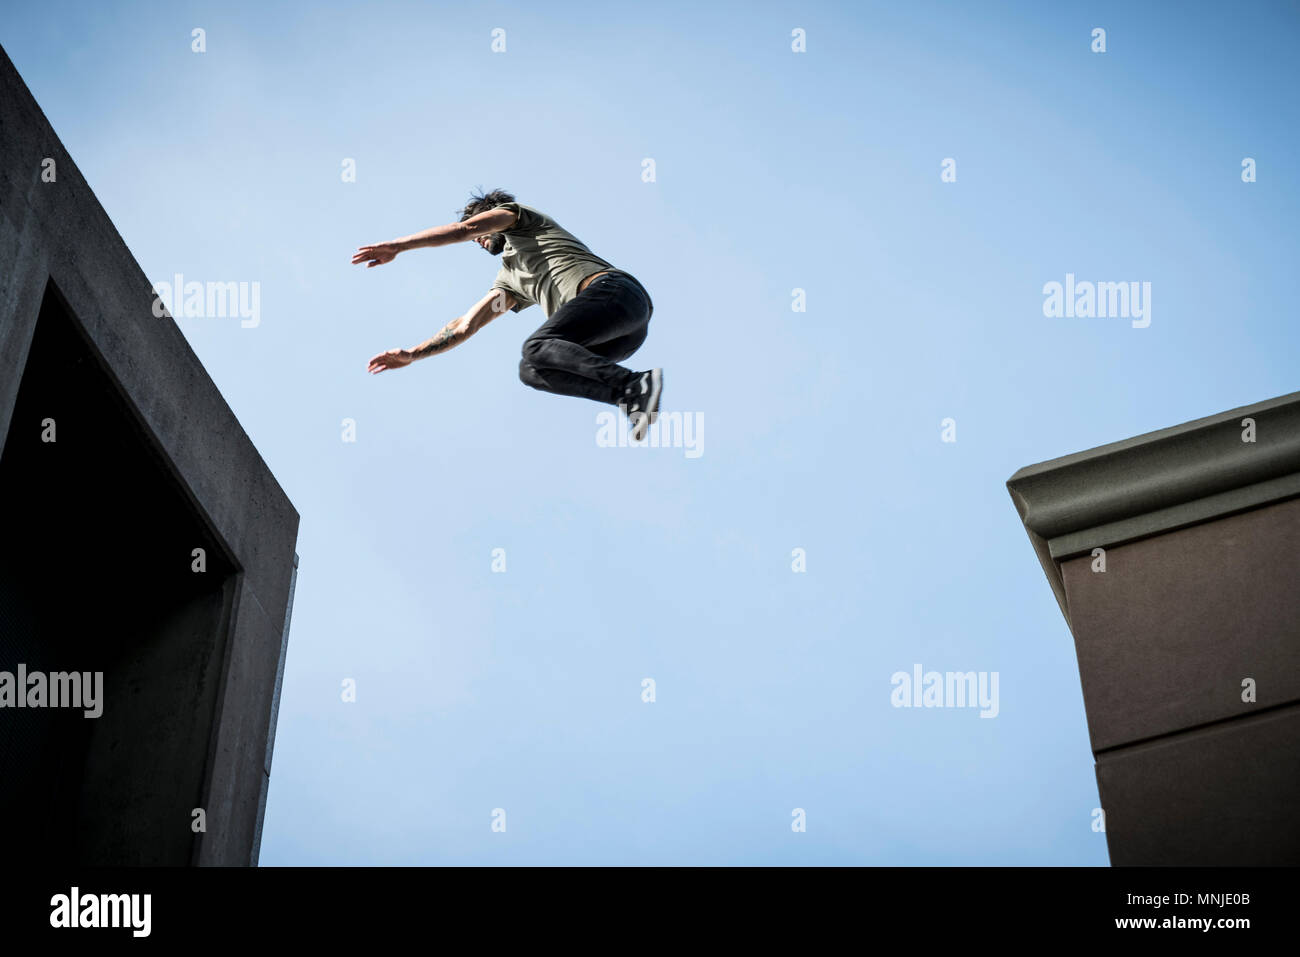 Local park athlete jumping across rooftops in downtown Denver, Colorado, USA Stock Photo